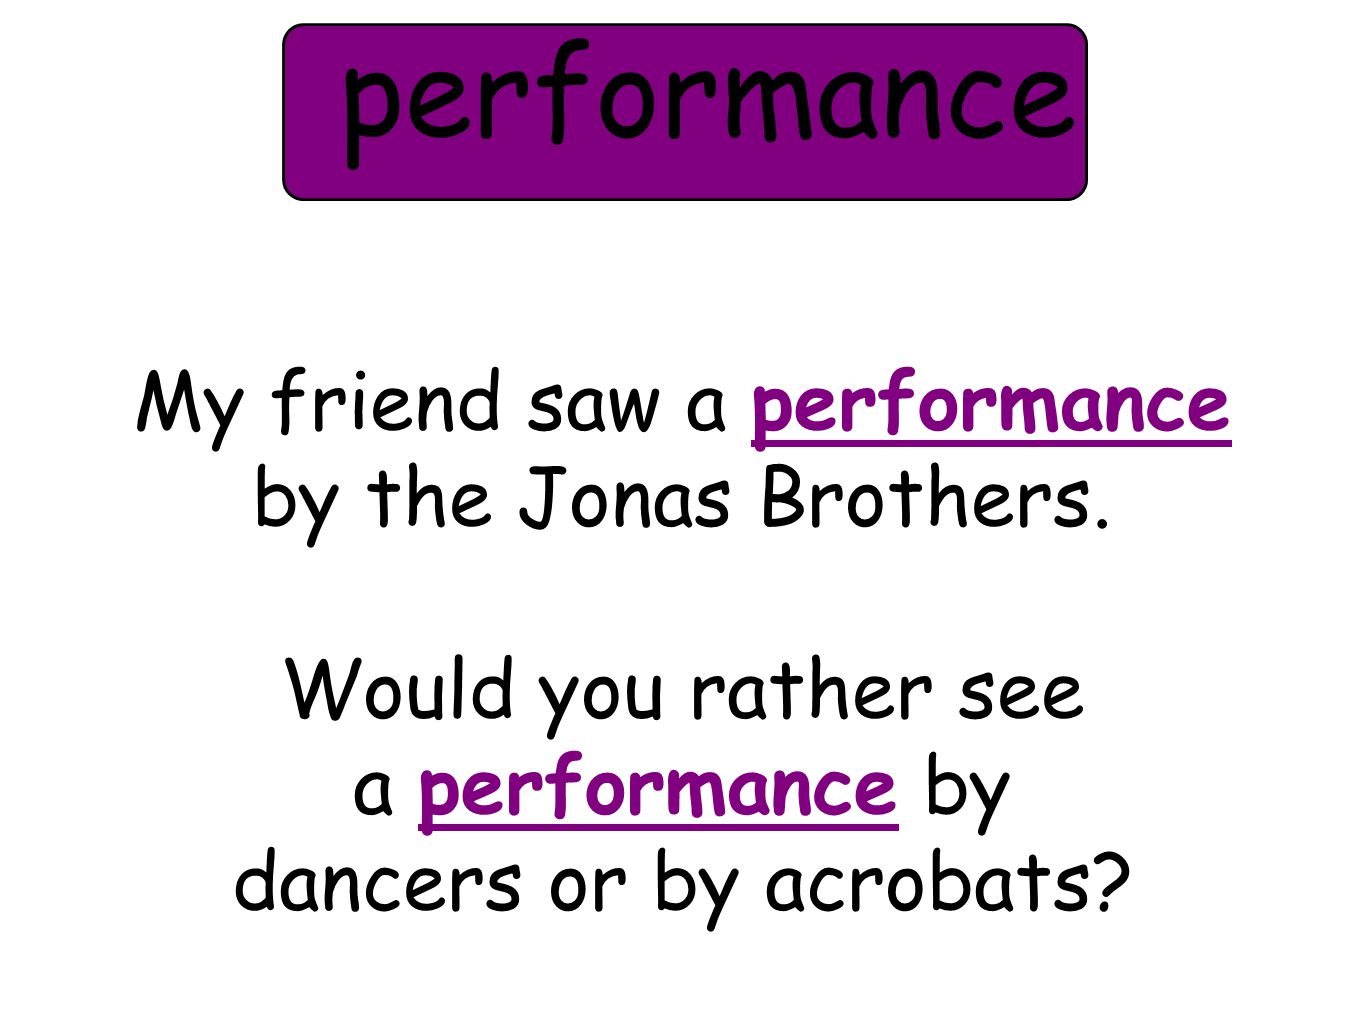 My friend saw a performance by the Jonas Brothers.